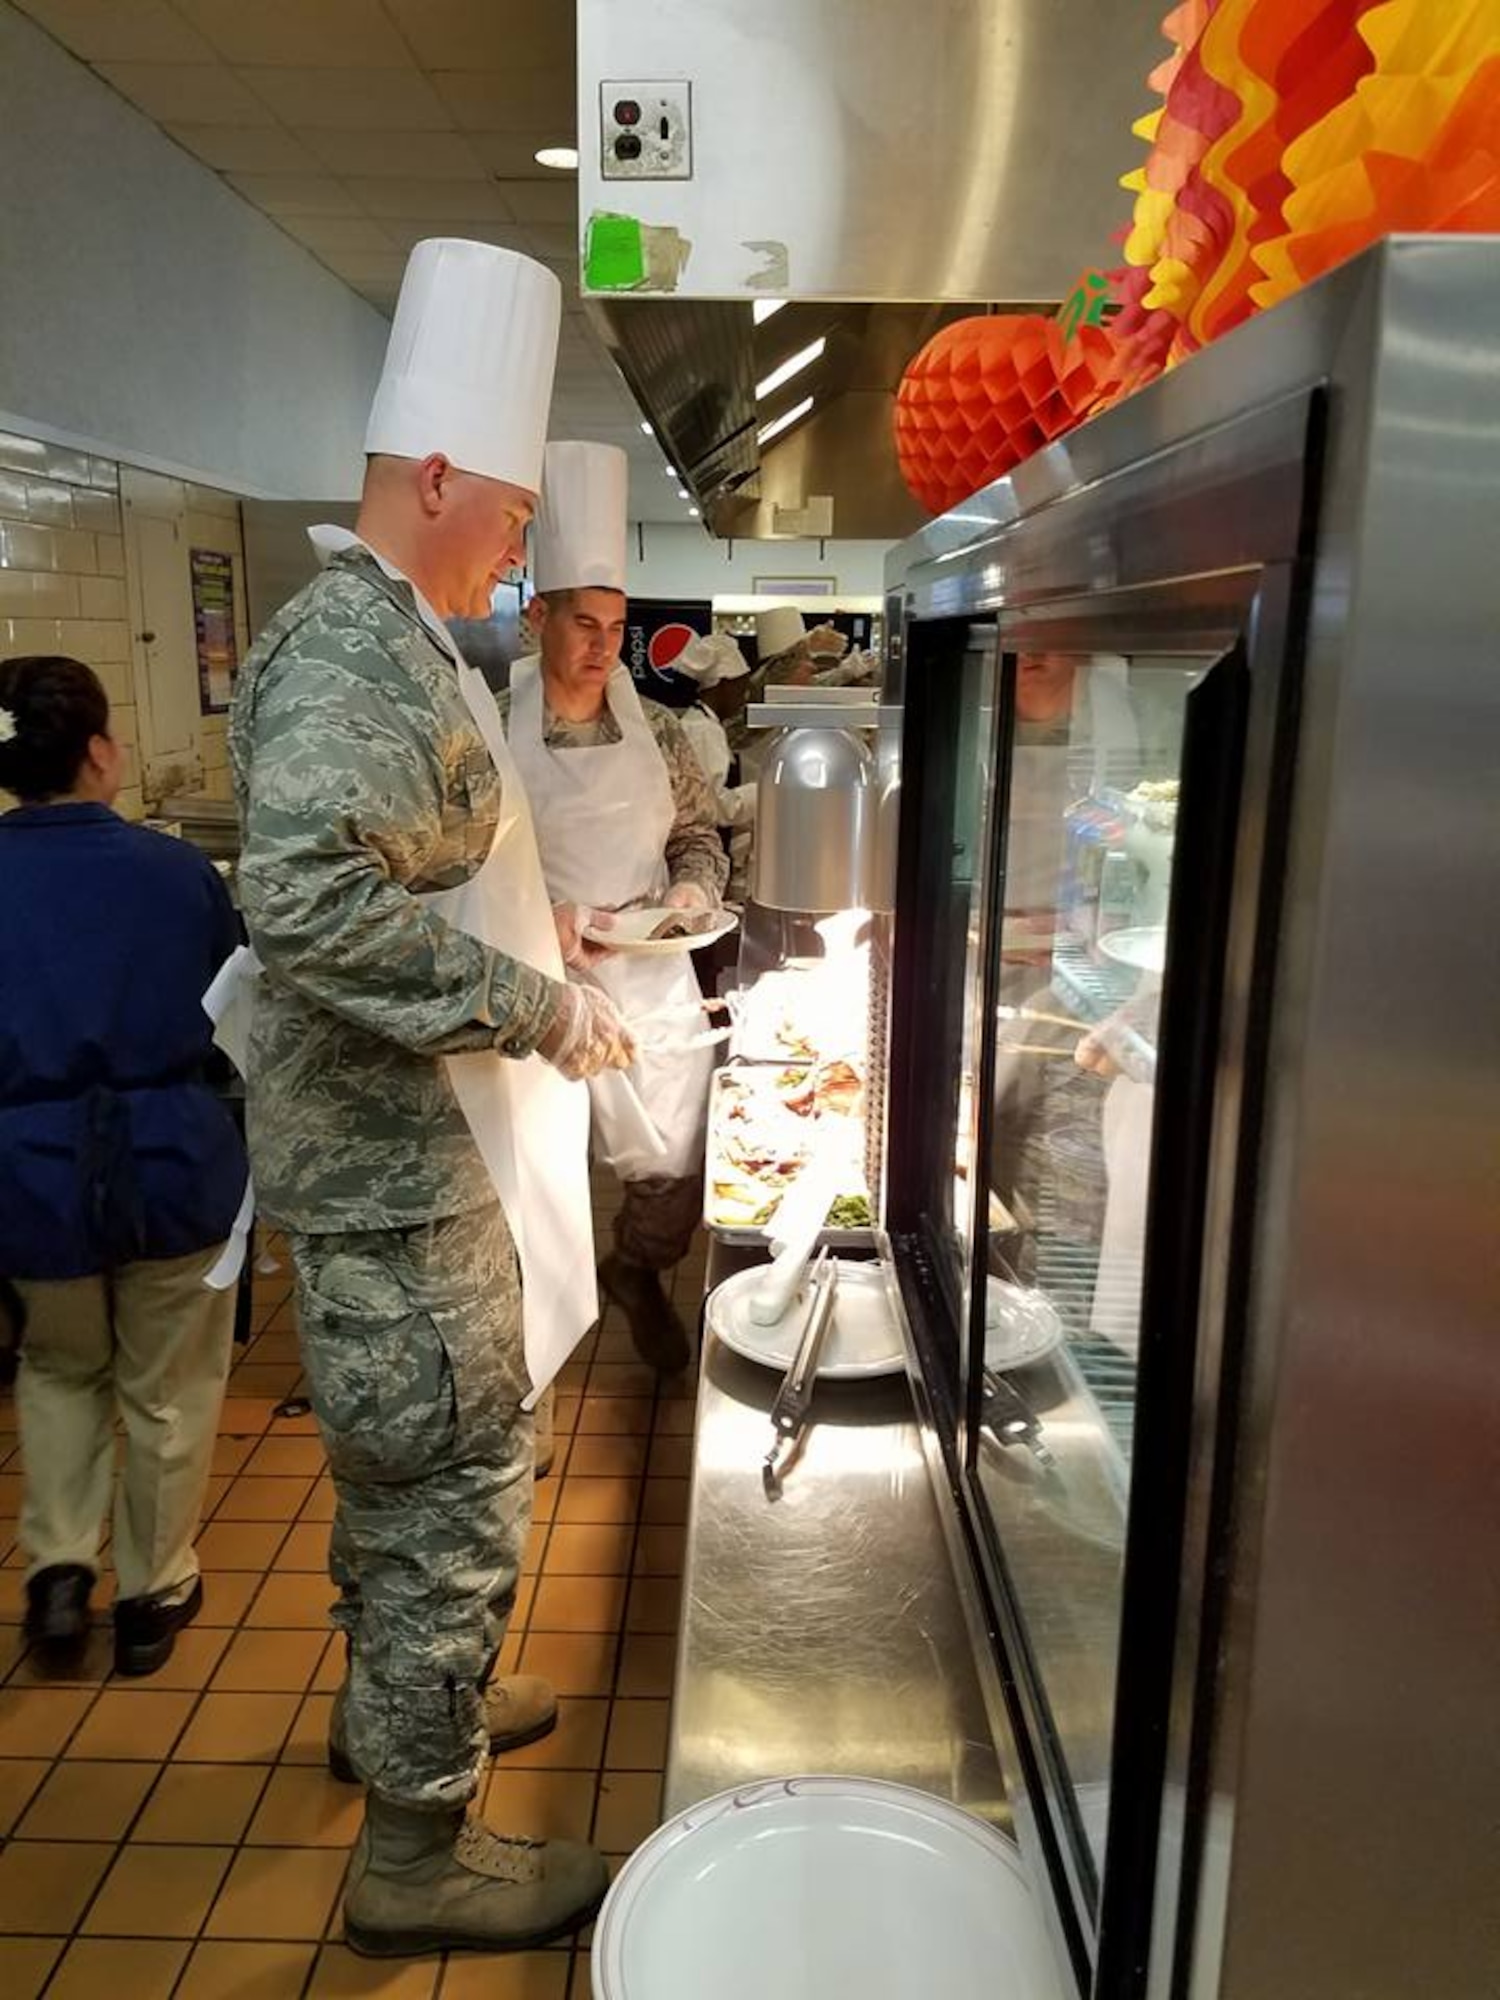 Col. Barry Dickey, 42nd Air Base Wing Vice Commander, serves a Thanksgiving meal at the Maxwell Air Force Base dining facility, Nov. 24, 2016. Base leadership spent time enjoying festivities with everyone in the facility on the holiday. (Courtesy photo)